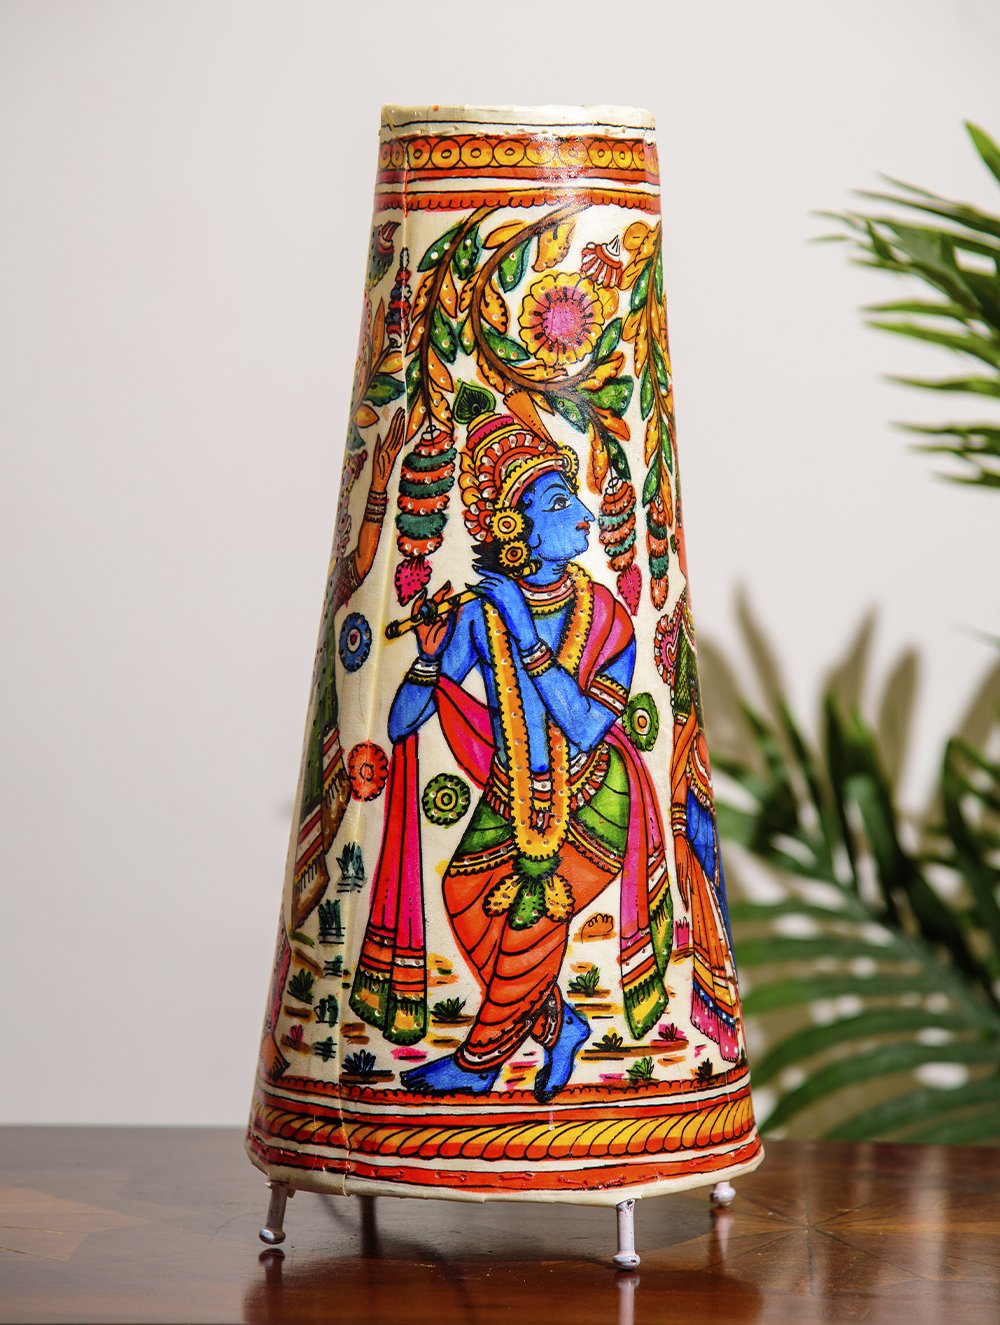 Load image into Gallery viewer, The India Craft House Andhra Multicoloured Painted Leather Table Lamp Shade - Krishna &amp; Radha